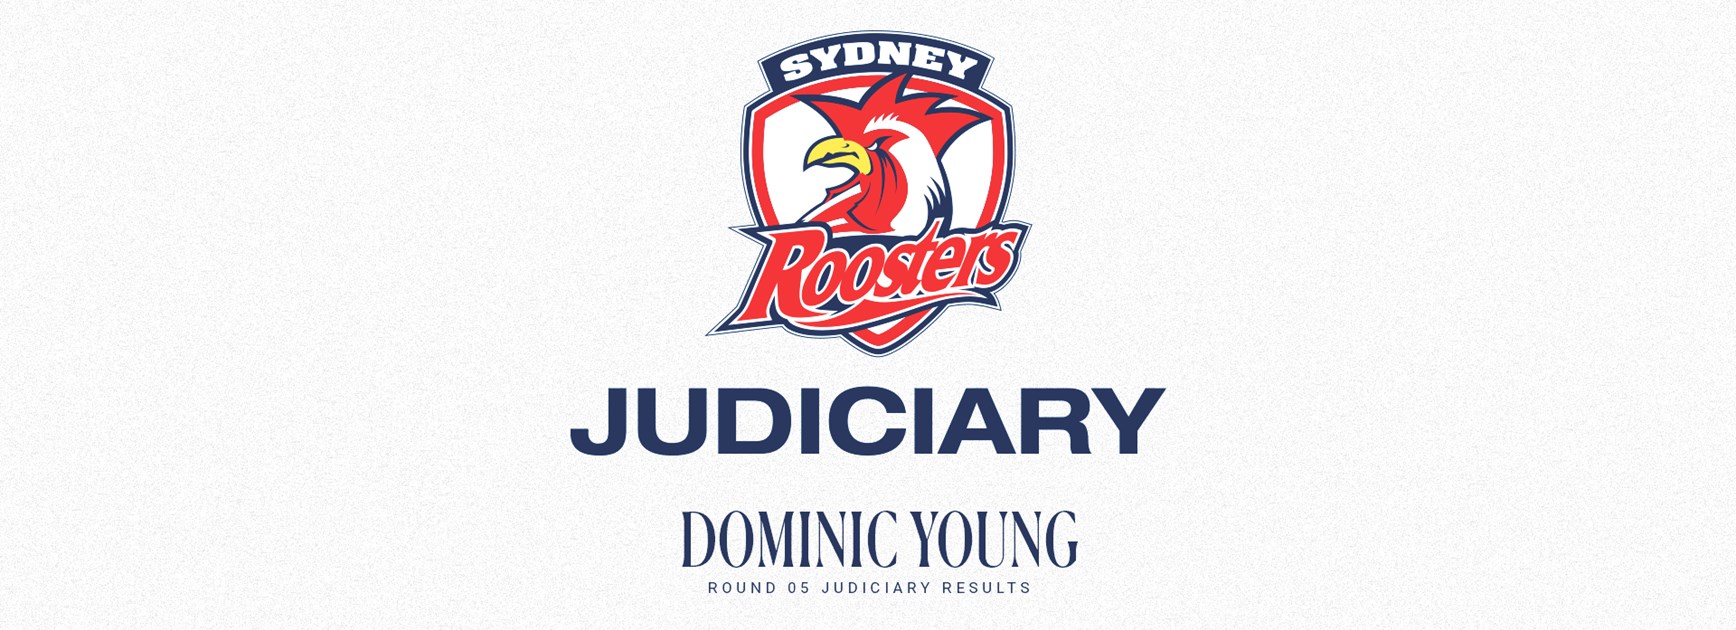 NRL Round 5 Judiciary Update: Dominic Young